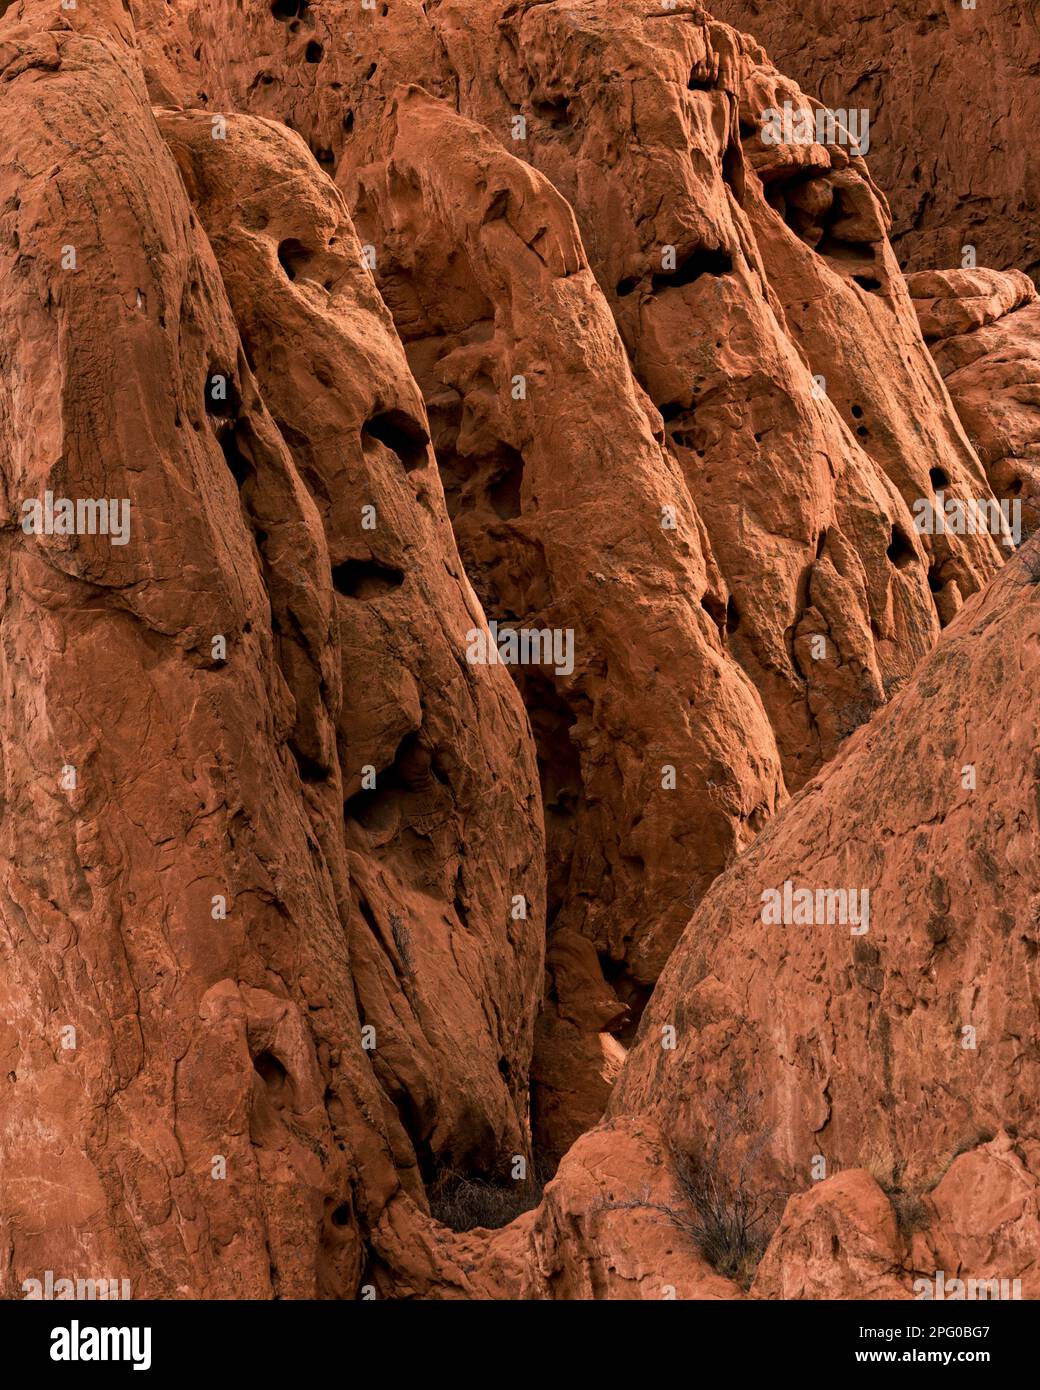 Red sandstone rock features, showing interesting texture, pits, pock marks, wind and water erosion, crevices, smooth edges, tree growing fin the rocks Stock Photo